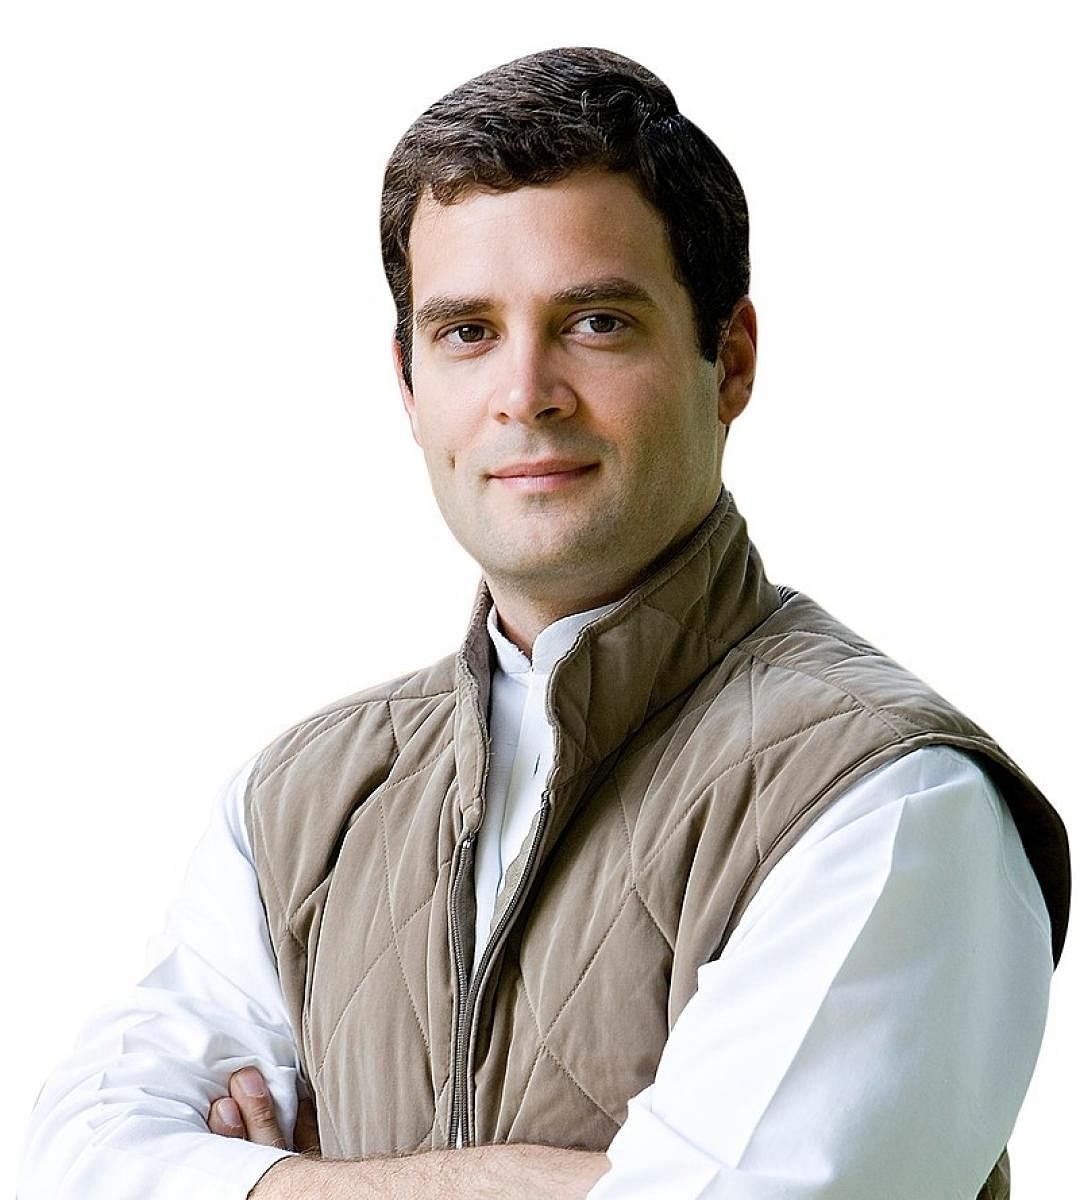 Rahul's next leg of poll compaign to have urban accent